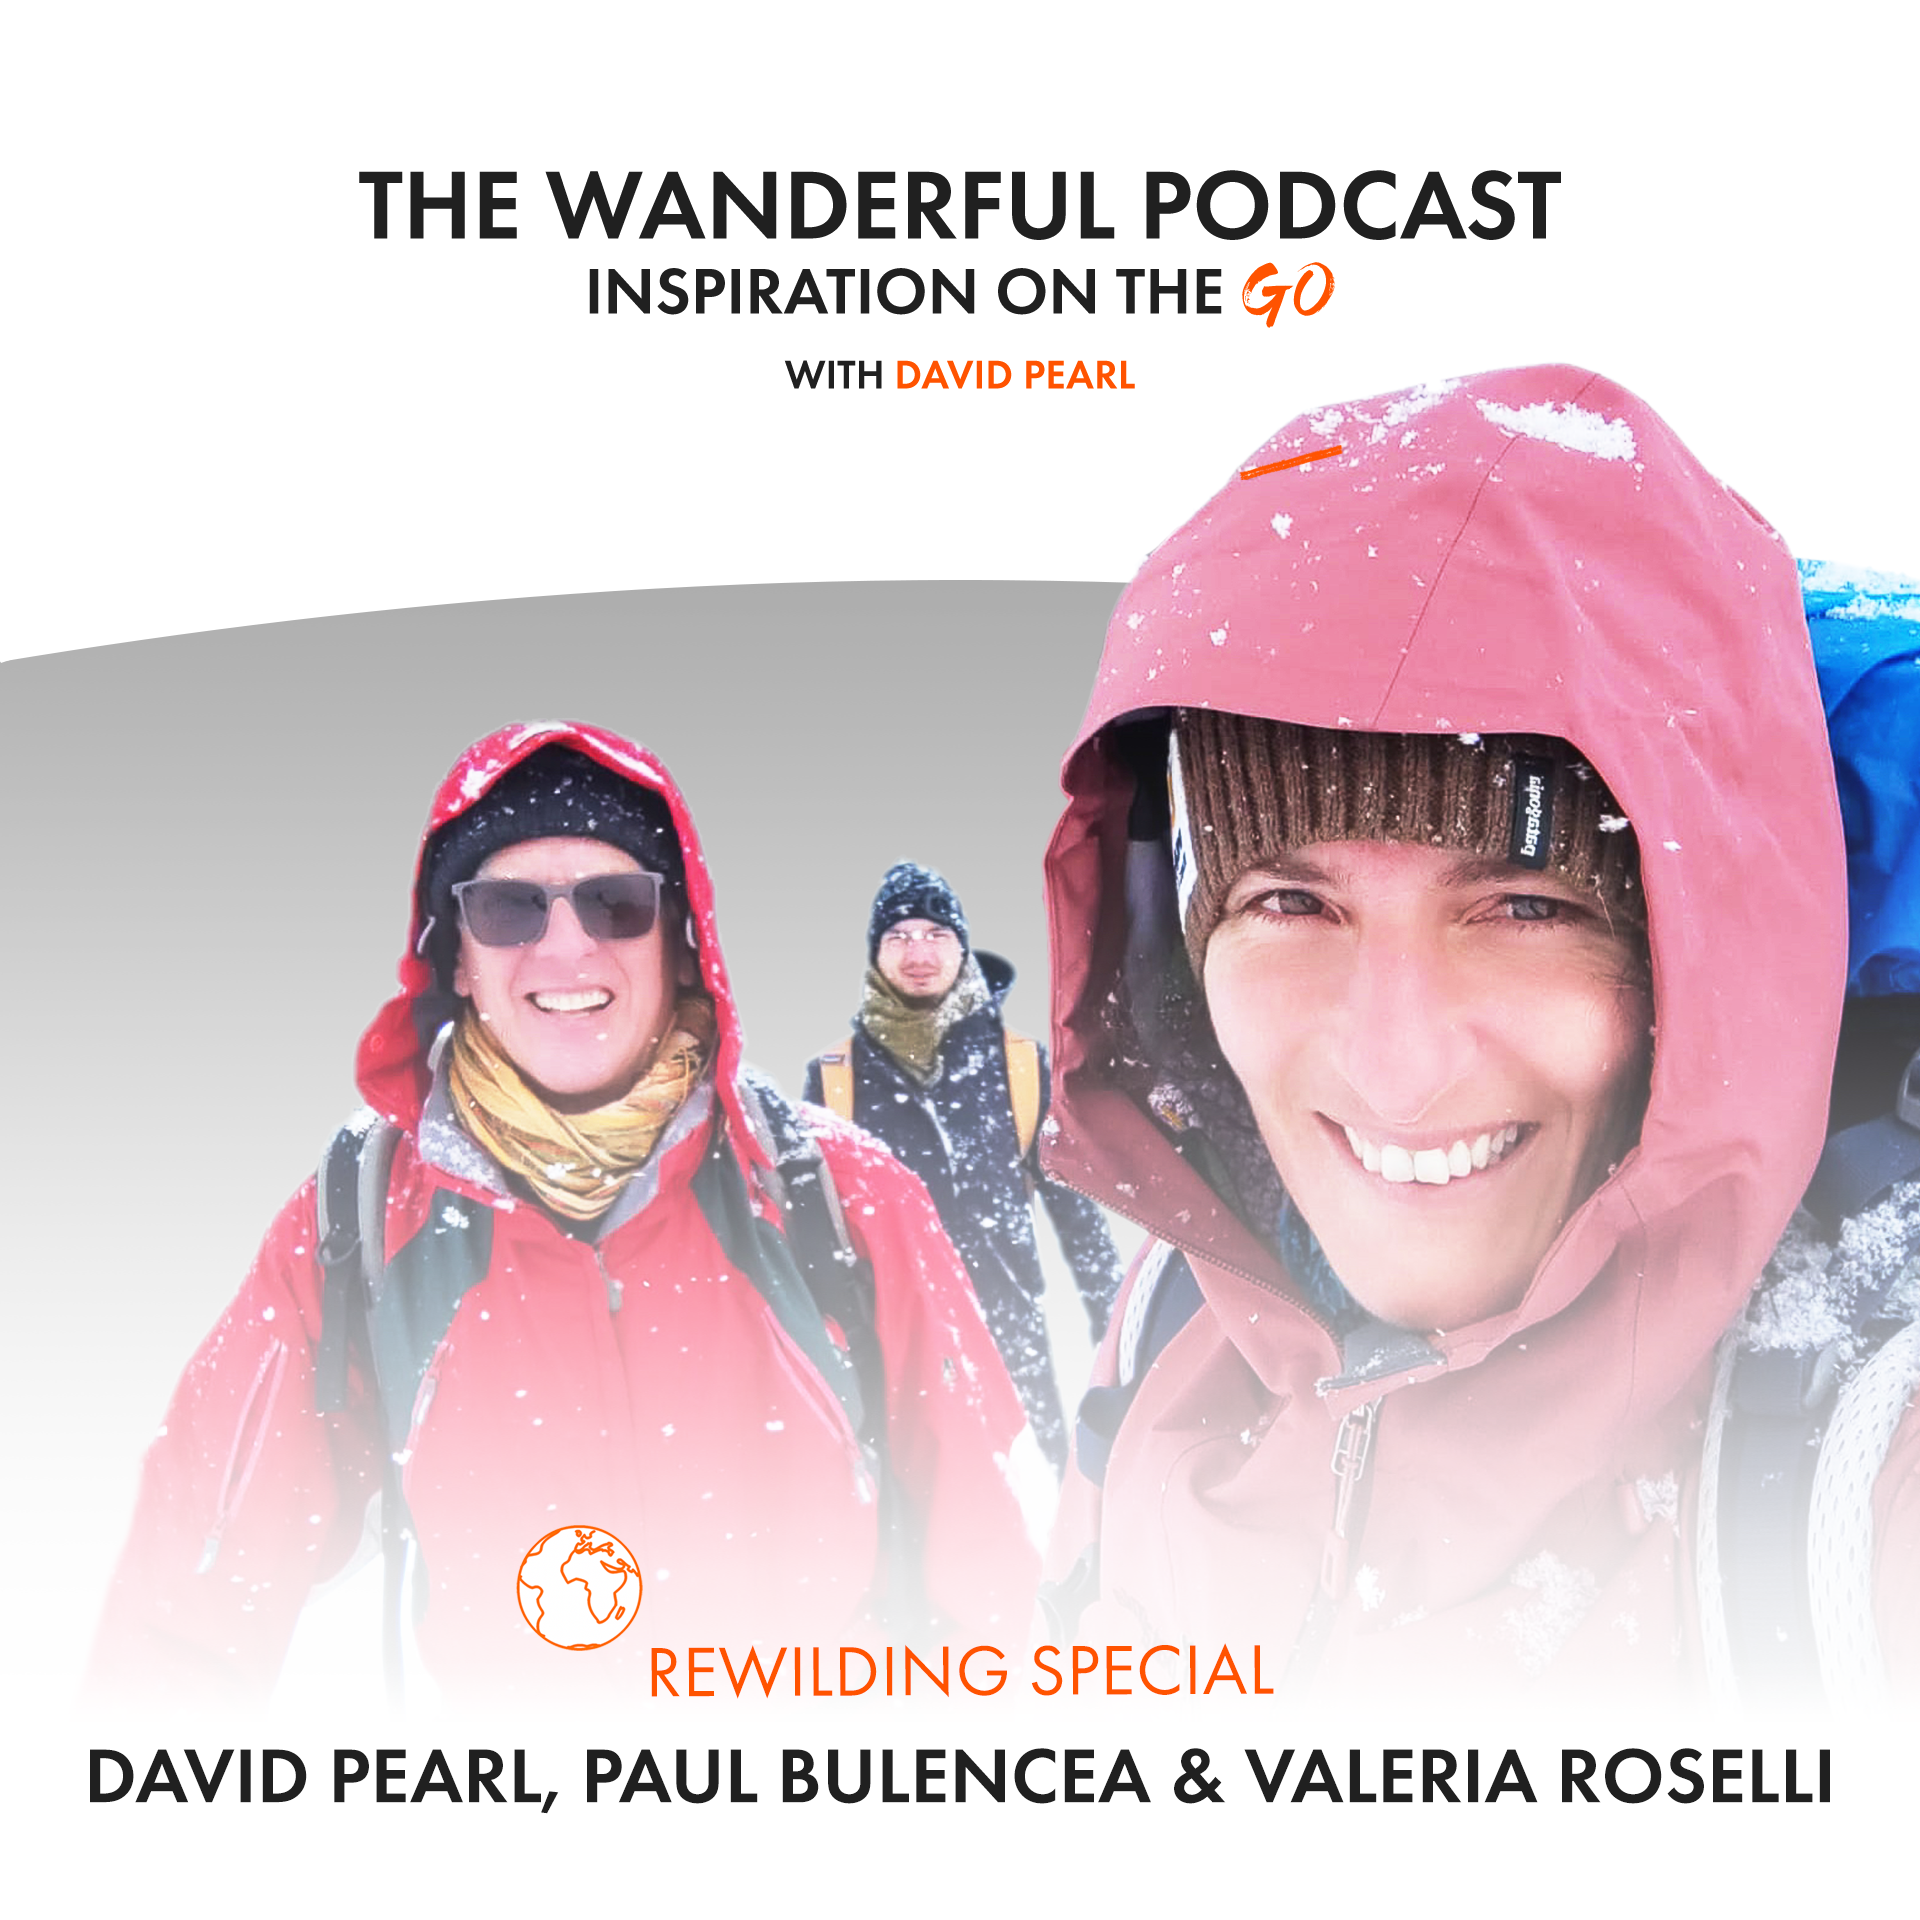 Re-Wilding Special with Paul Bulencea & Valeria Roselli: The Wanderful Podcast with David Pearl